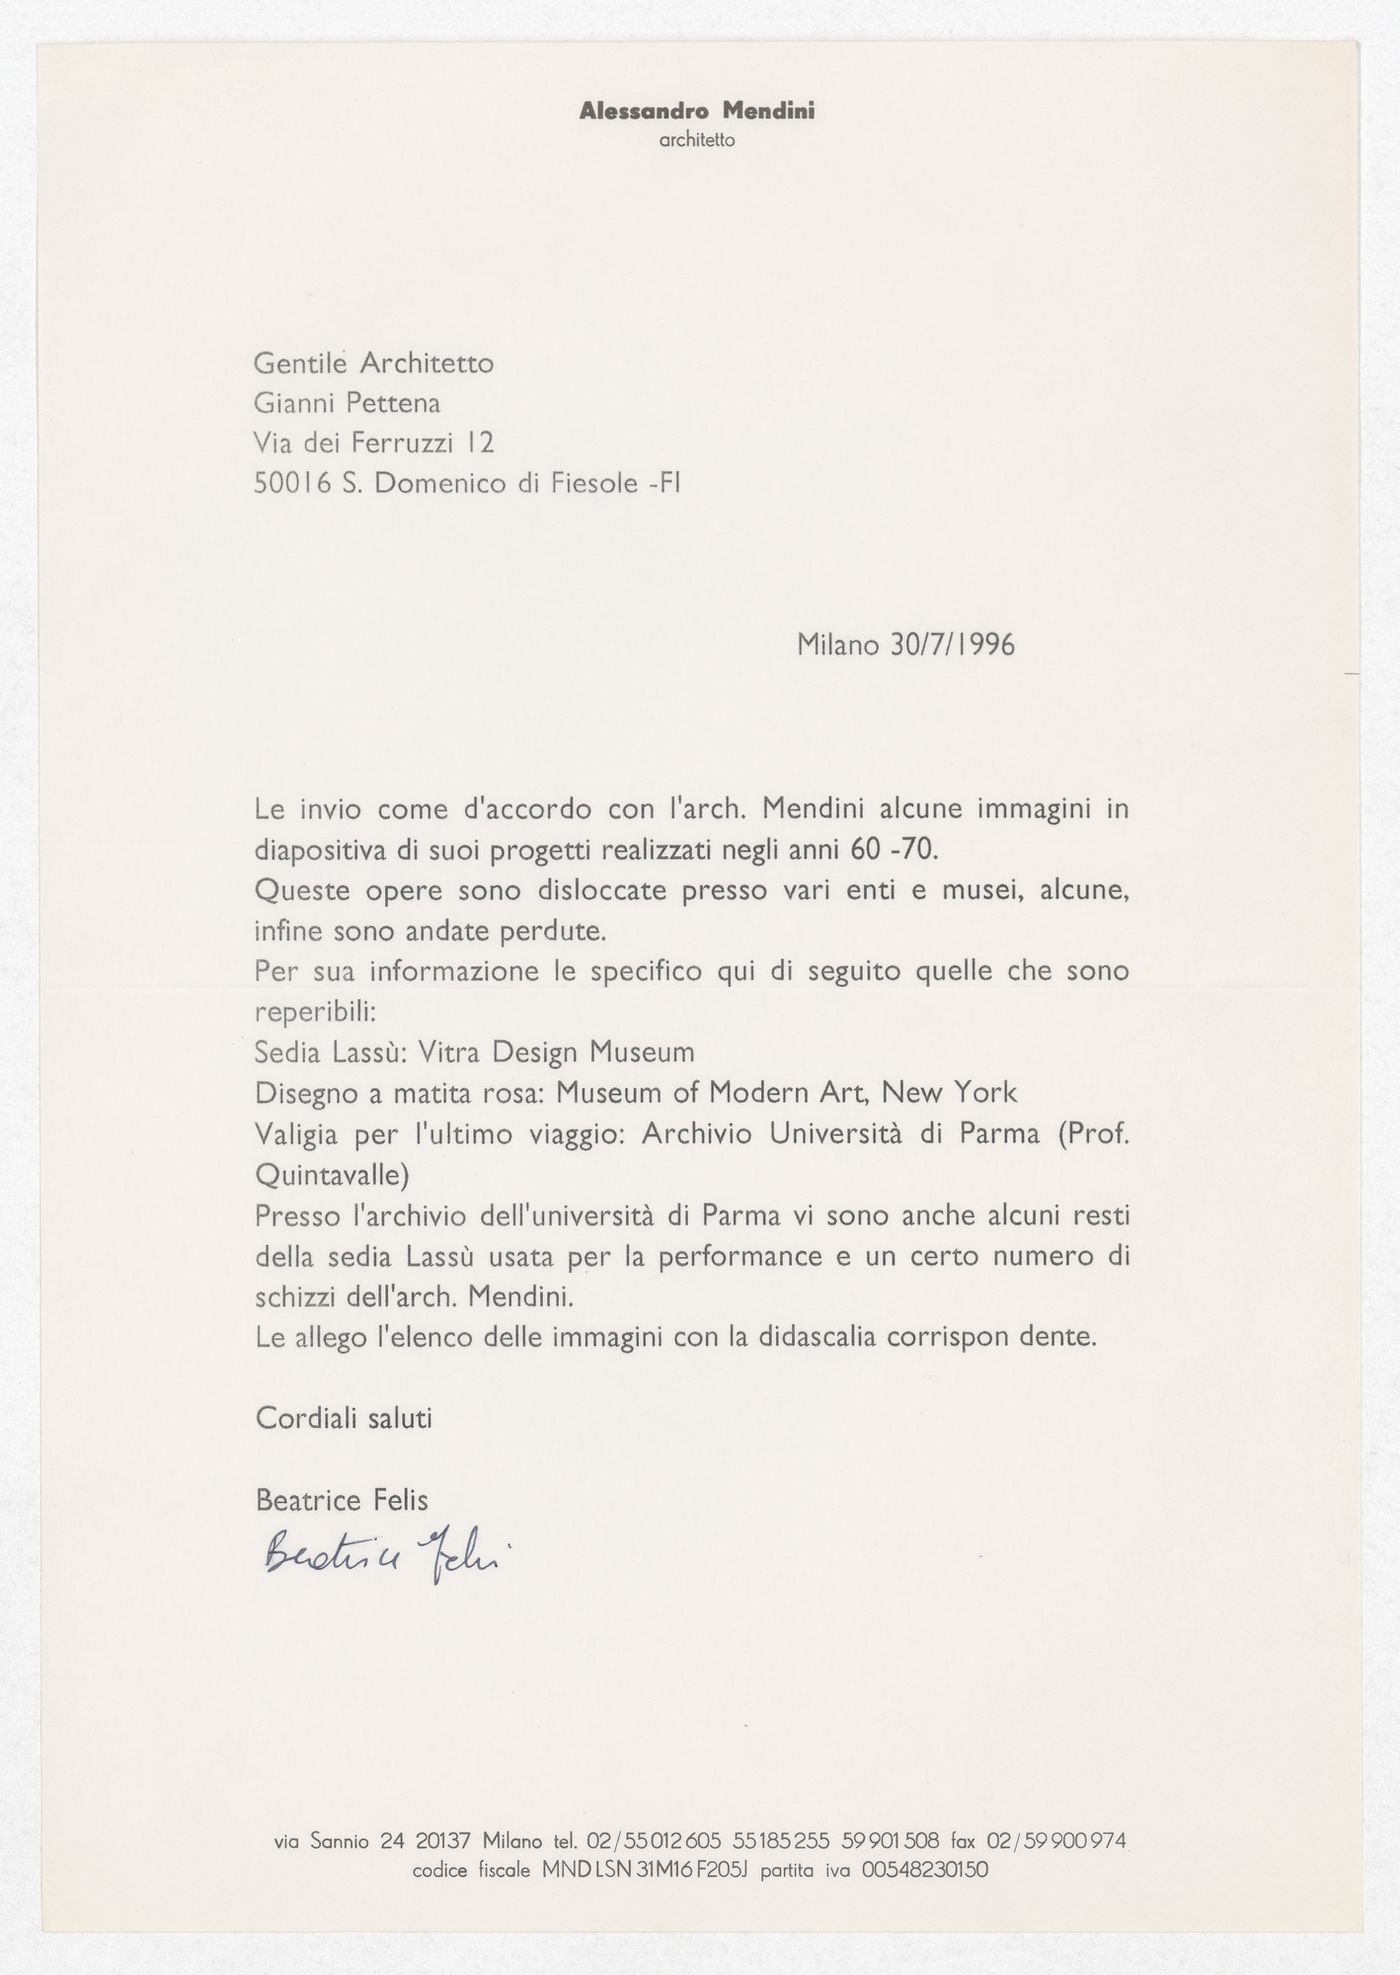 Correspondence and image captions from Beatrice Felis on behalf of Alessandro Mendini related to the exhibition Radicals. Architecttura e Design 1960-1975